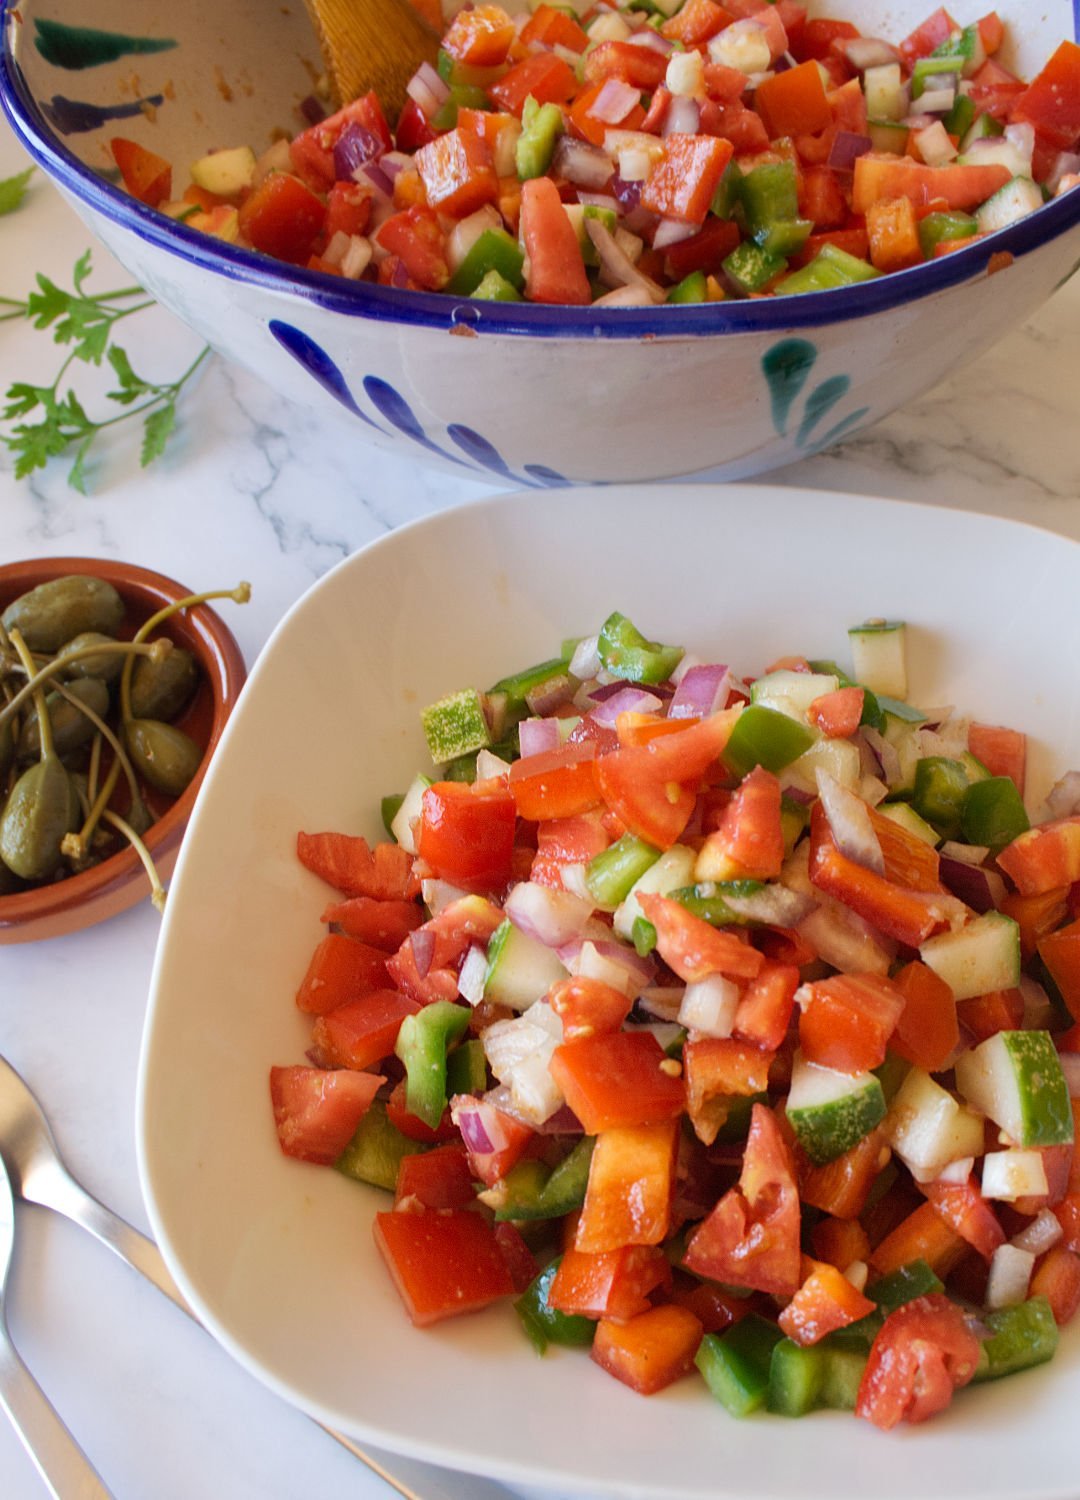 A large colorful bowl of Pipirrana Spanish Salad sits waiting to be served to a small white bowl.